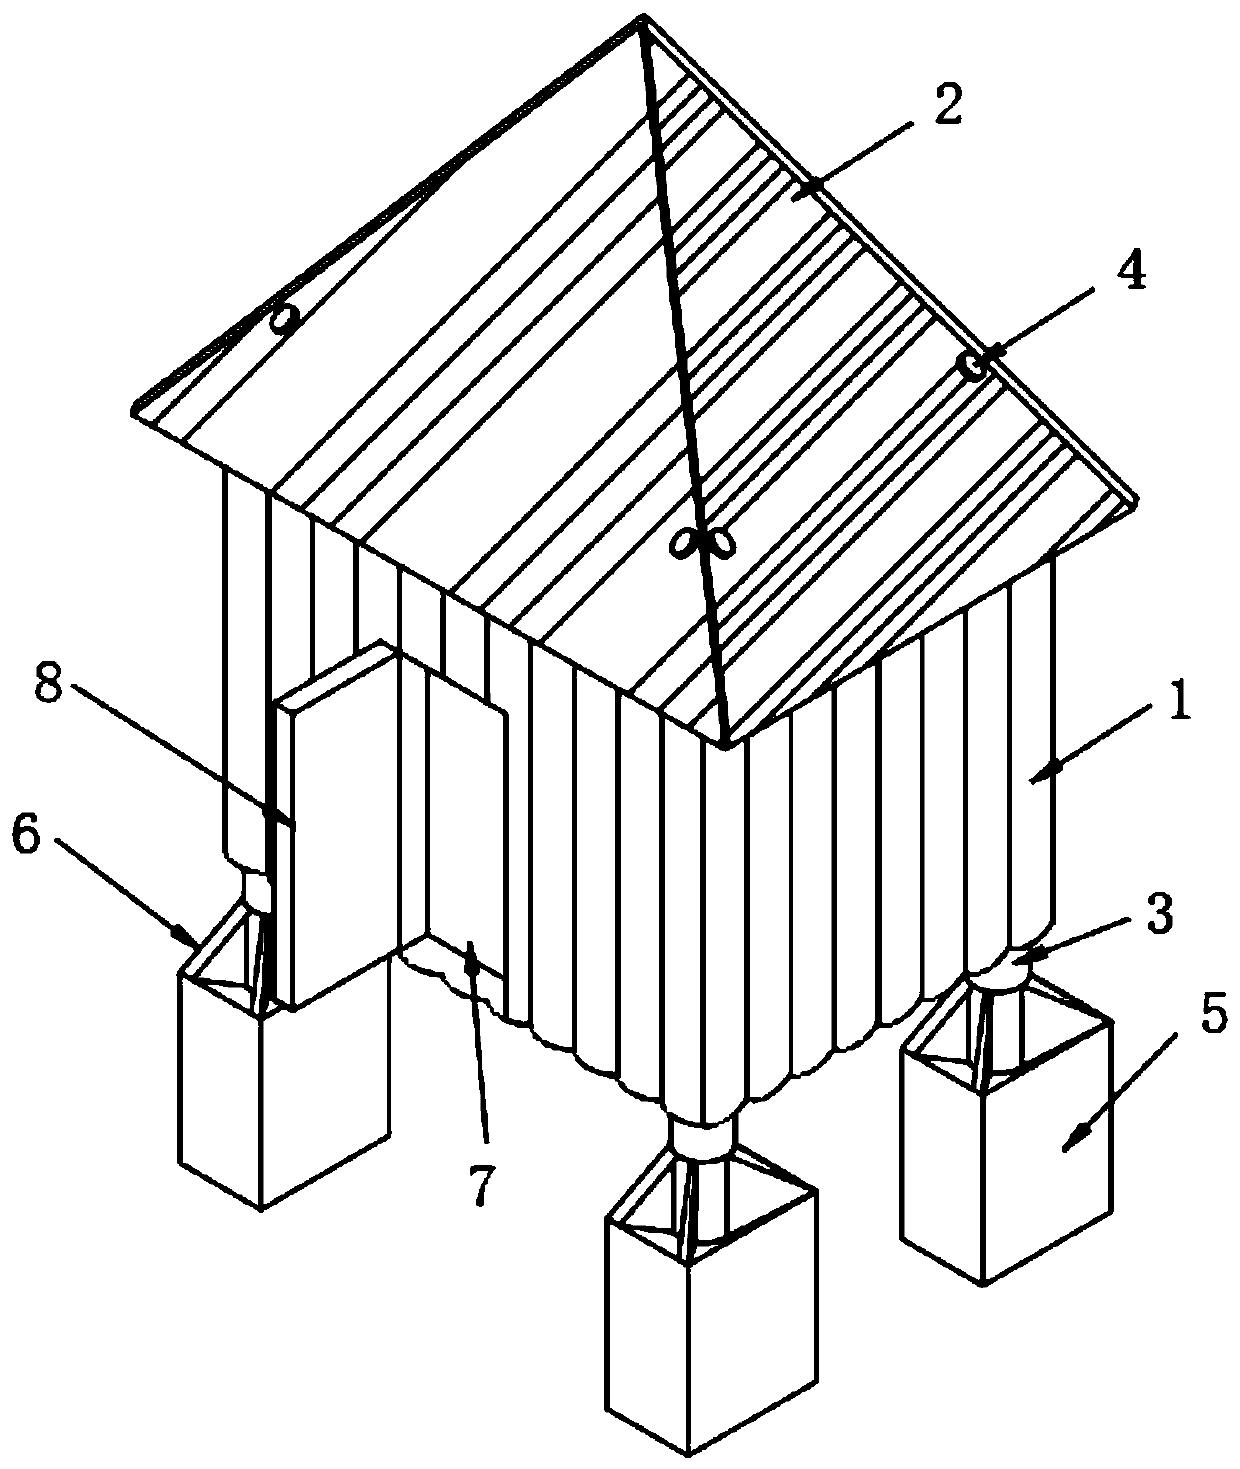 Bamboo building and bamboo supporting building frame thereof